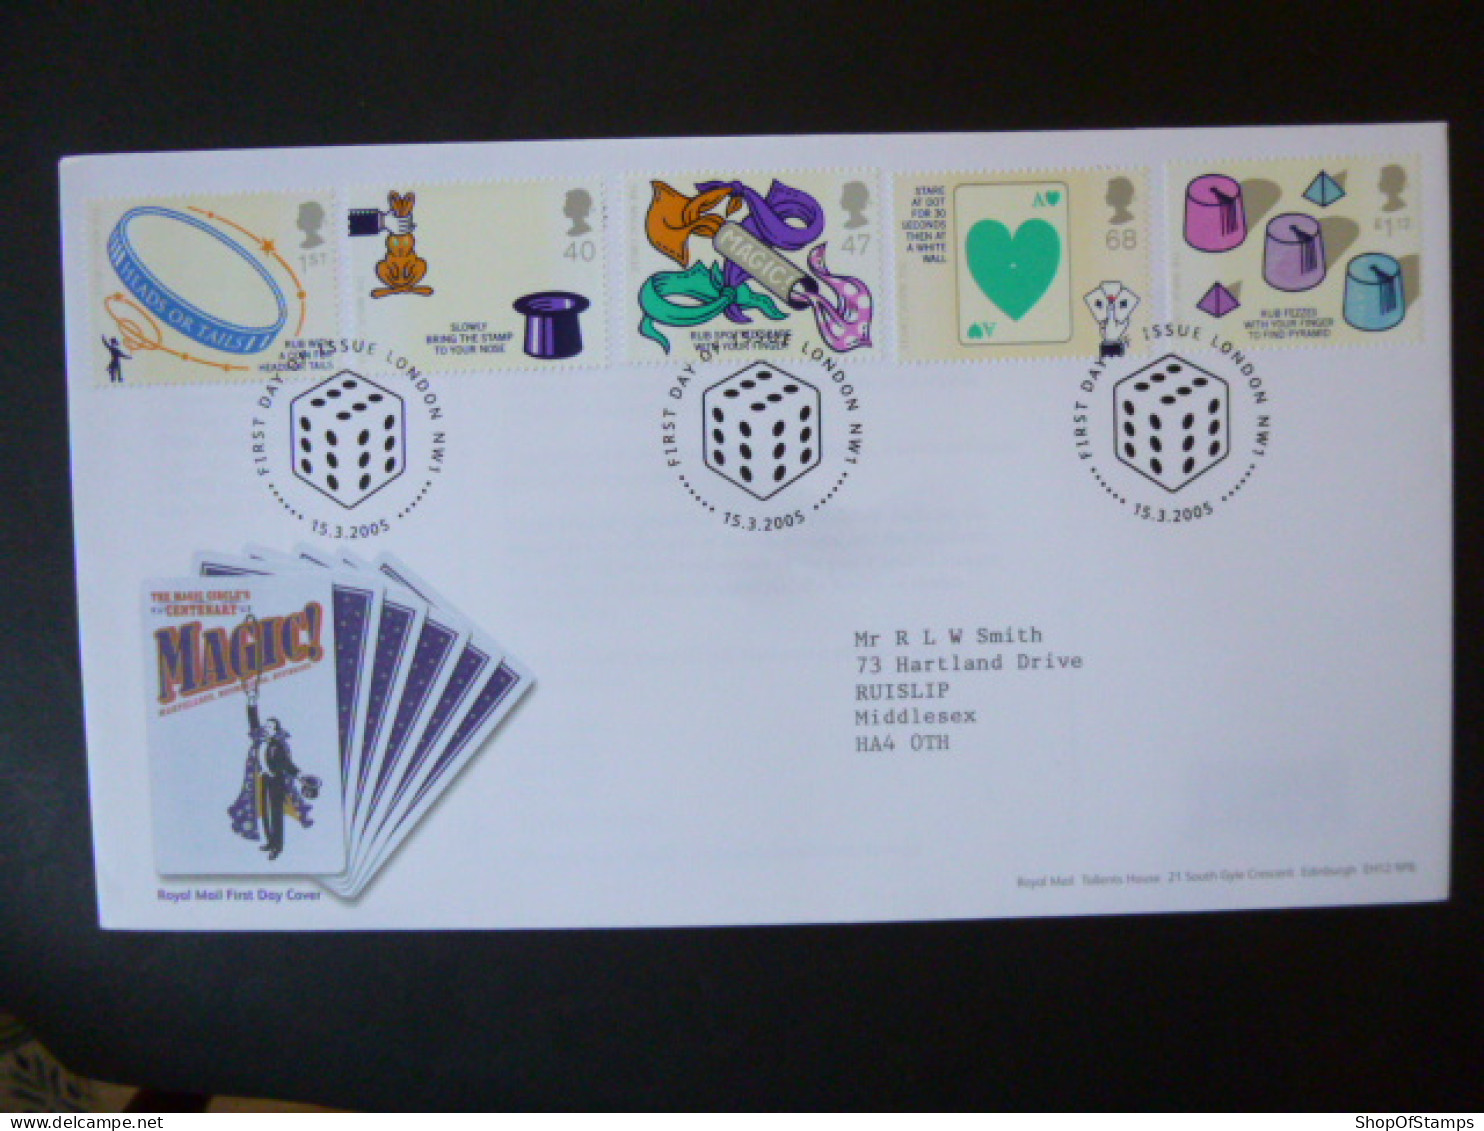 GREAT BRITAIN SG 2525-29 CENTENARY OF MAGIC CIRCLE FDC LONDON - Unclassified